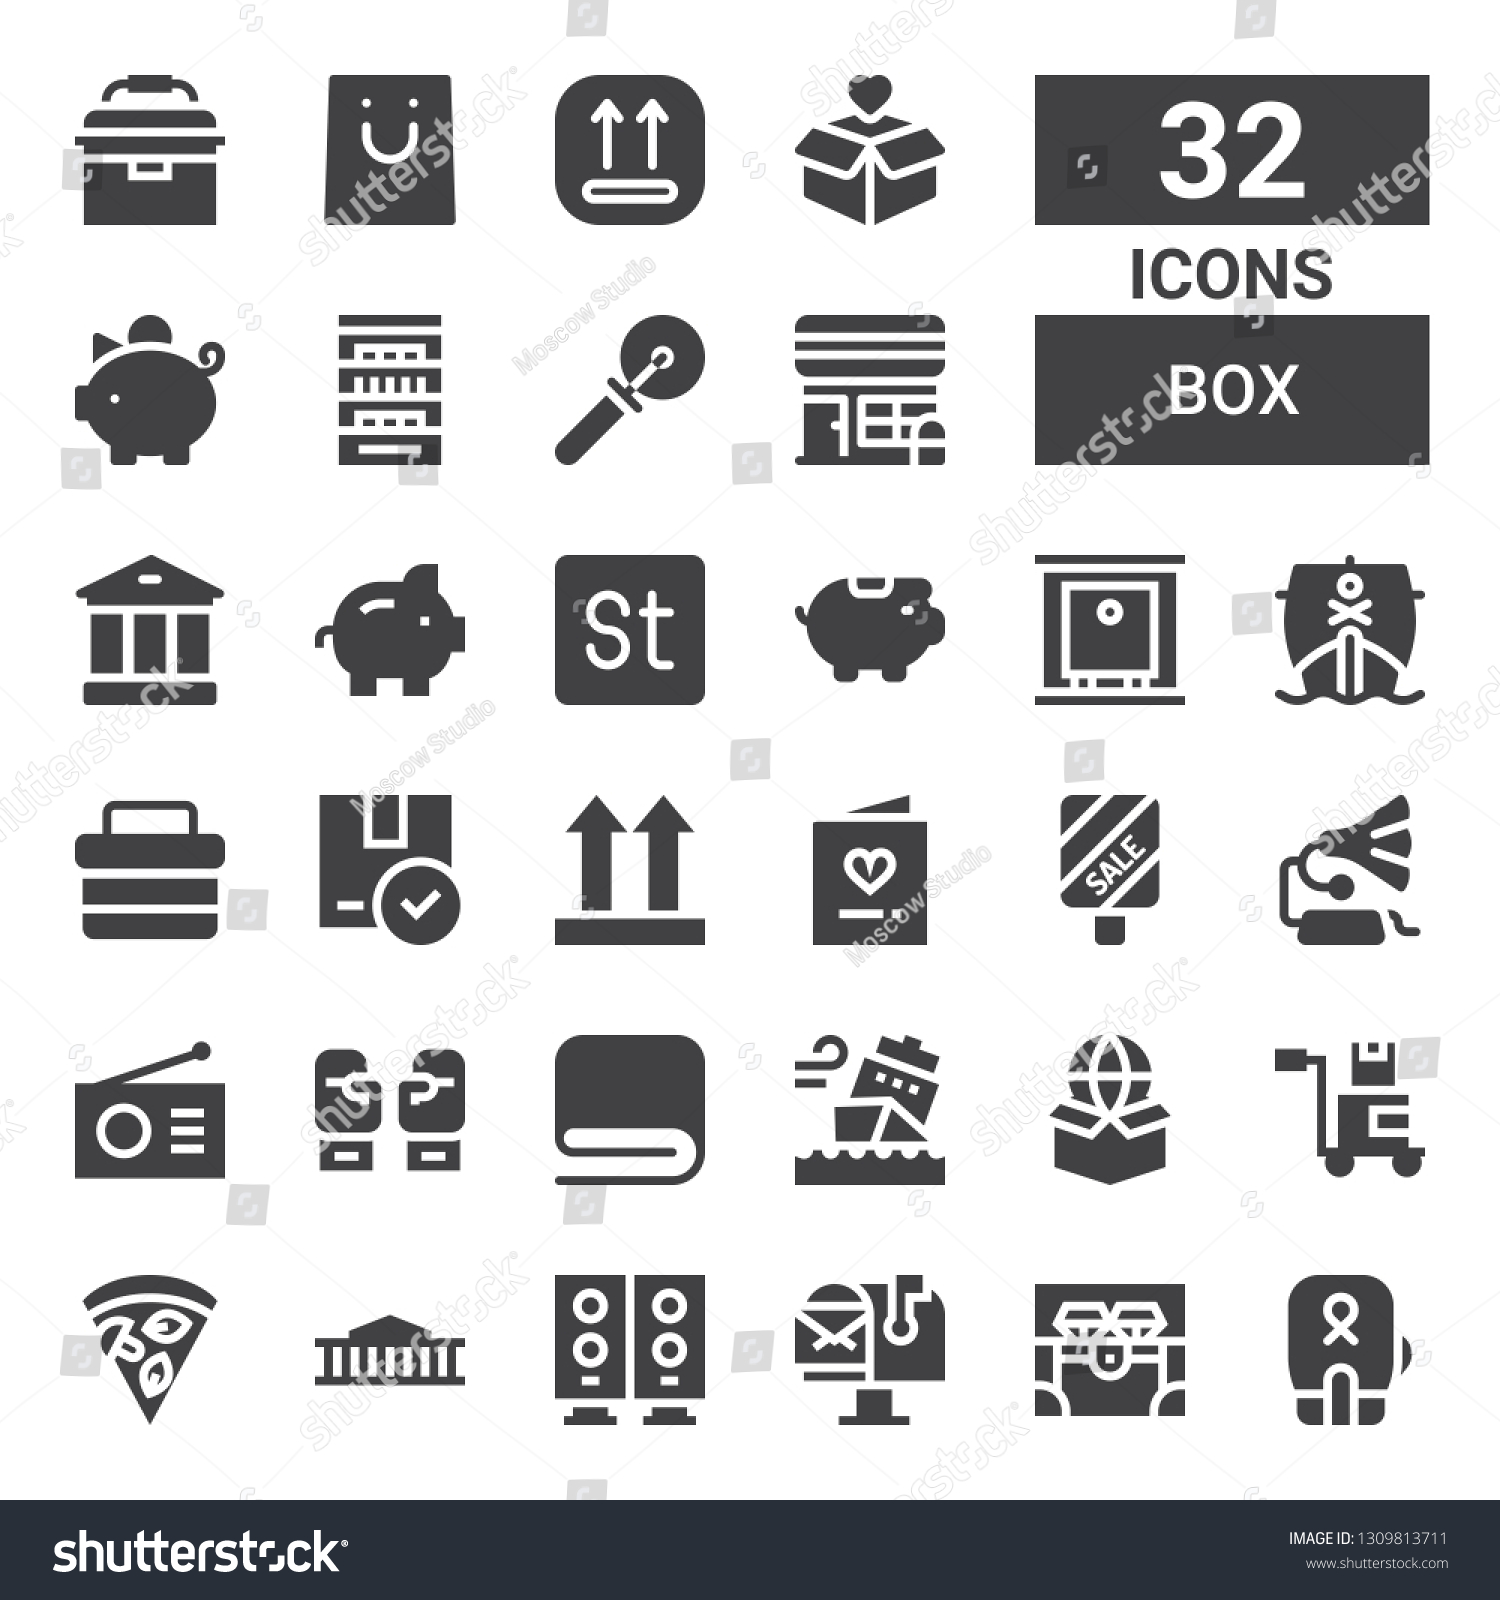 Box Icon Set Collection 32 Filled Stock Vector Royalty Free Shutterstock